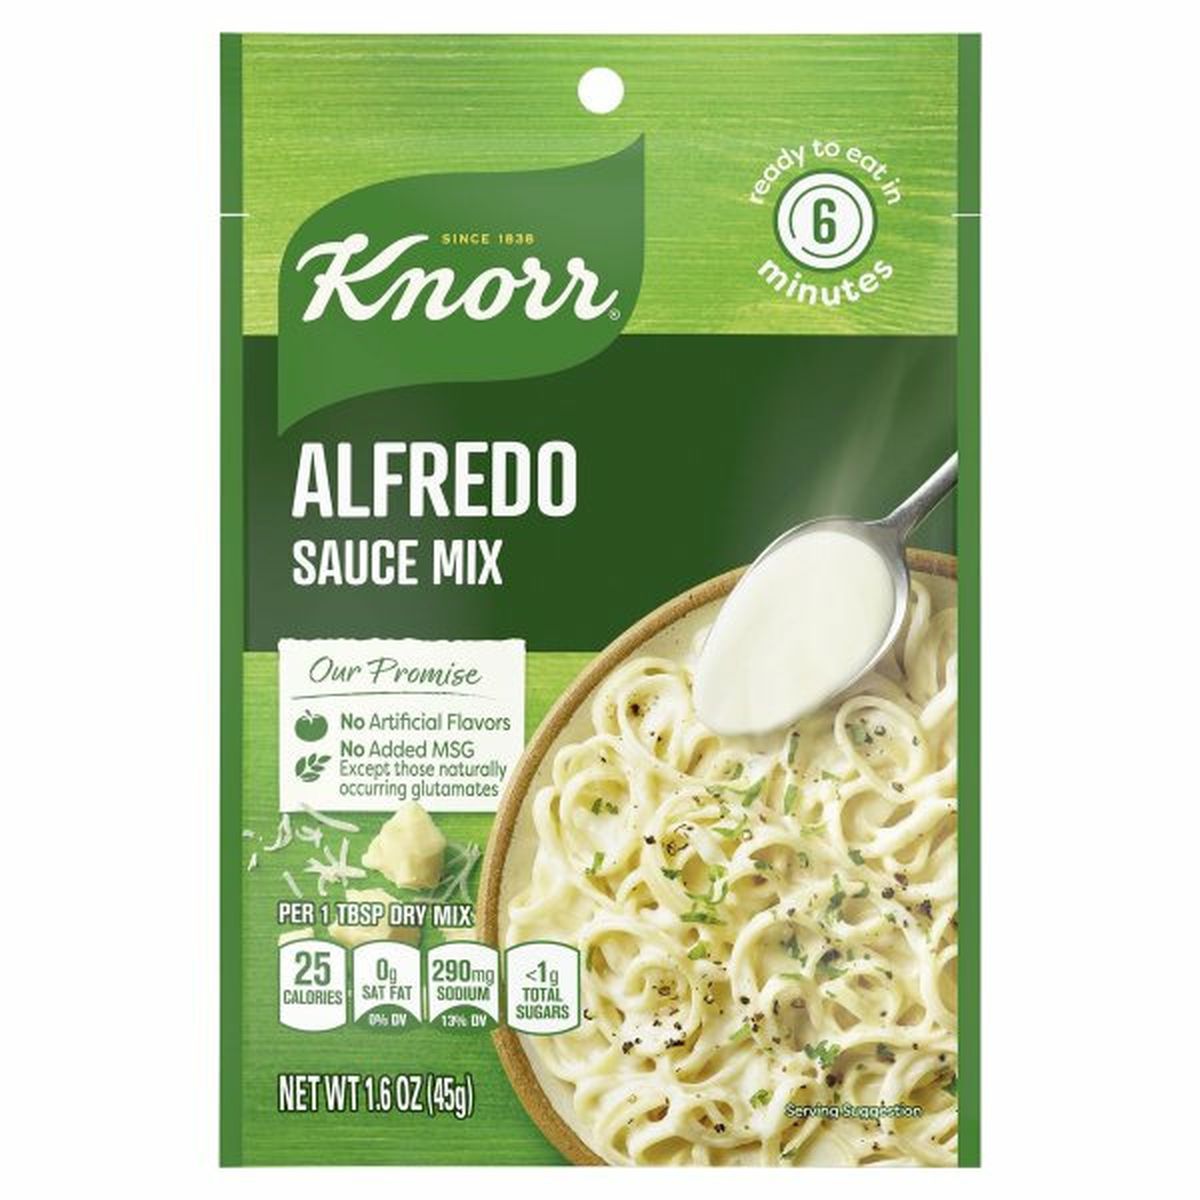 Calories in Knorr Sauce Mix, Alfredo